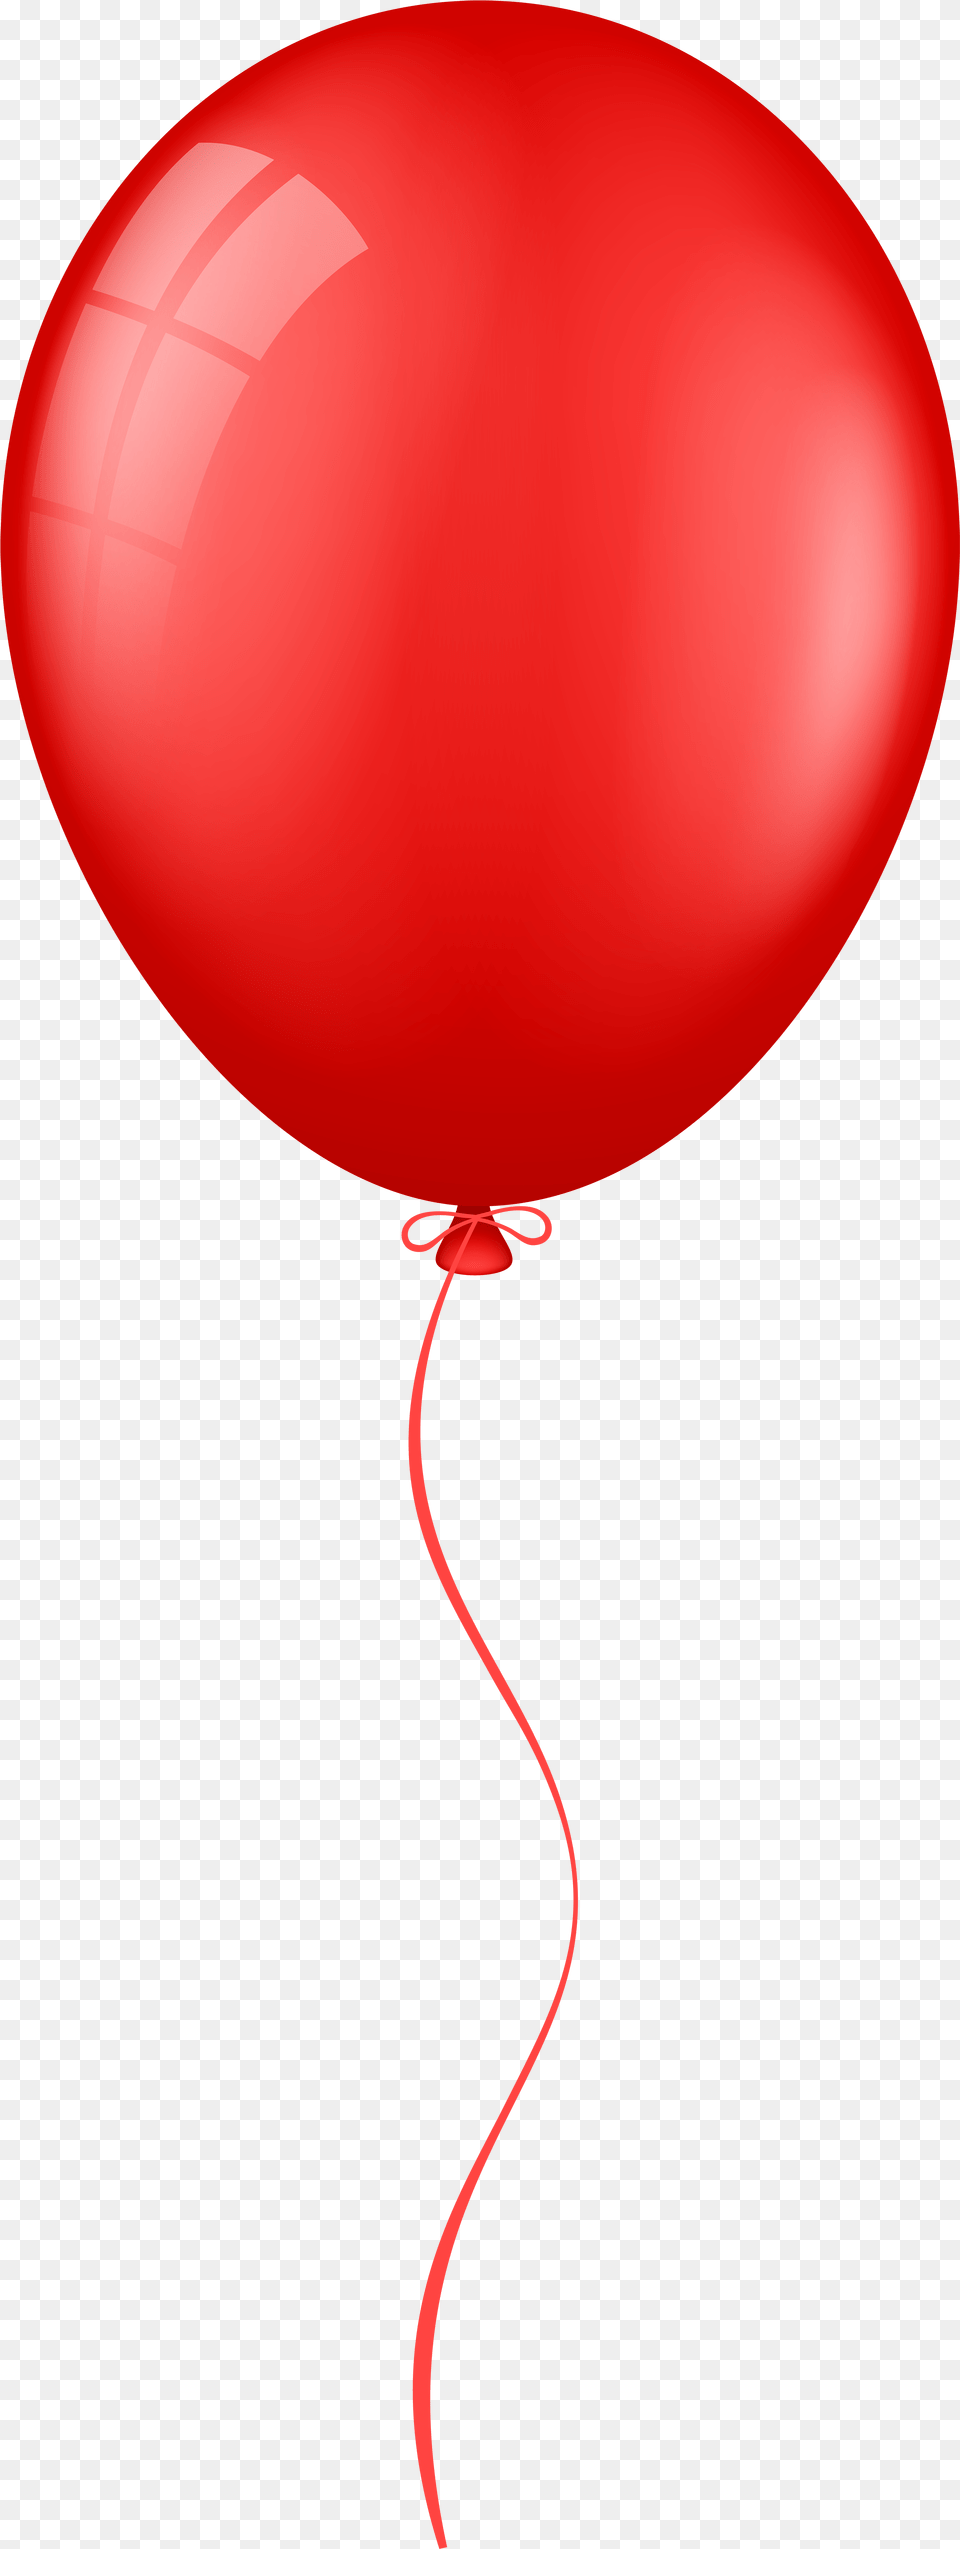 Red Balloons Transparent Background Balloon Clip Art Free Png